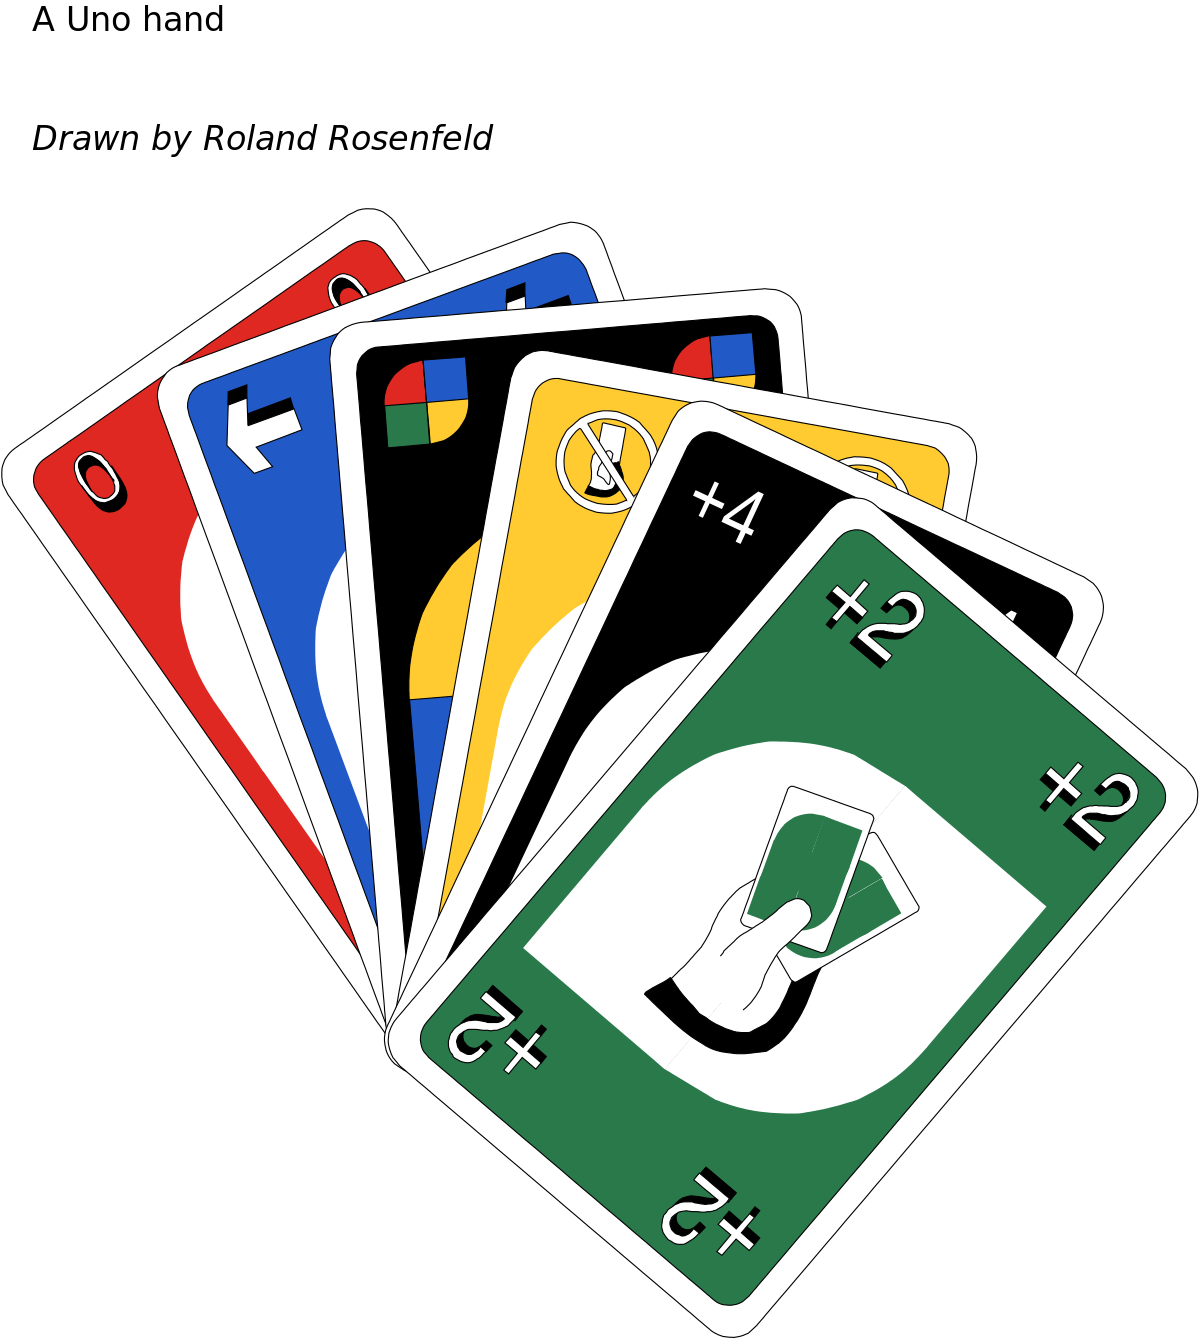 File:UNO cards deck.svg - Wikimedia Commons